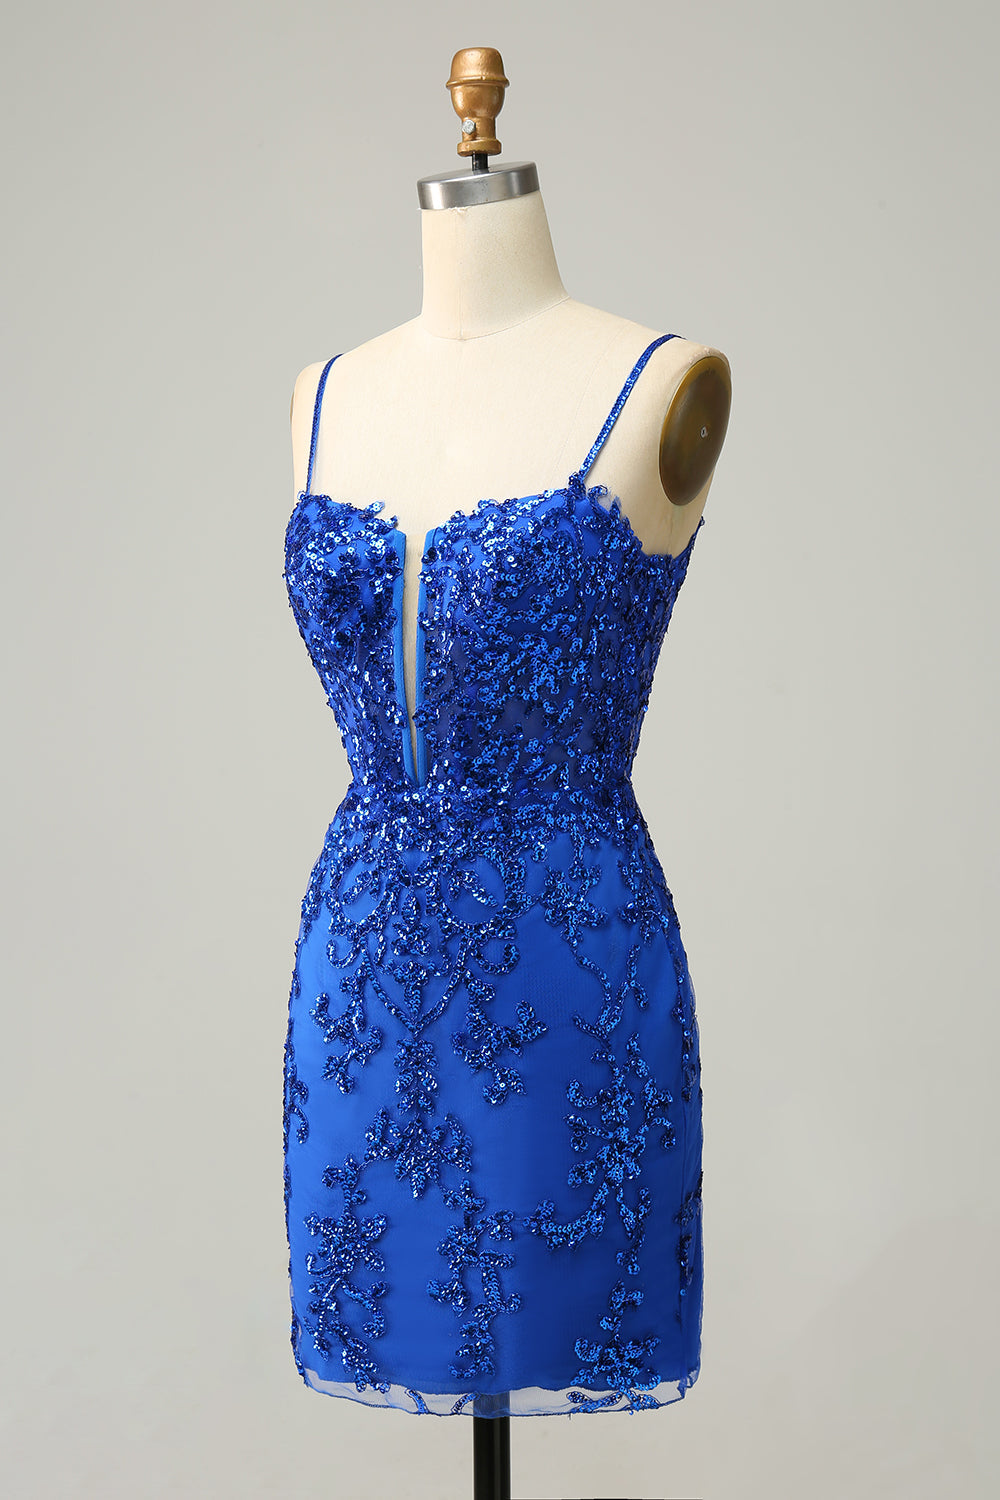 Spaghetti Straps Sheath Sequin With Lace Homecoming Cocktail Dresses